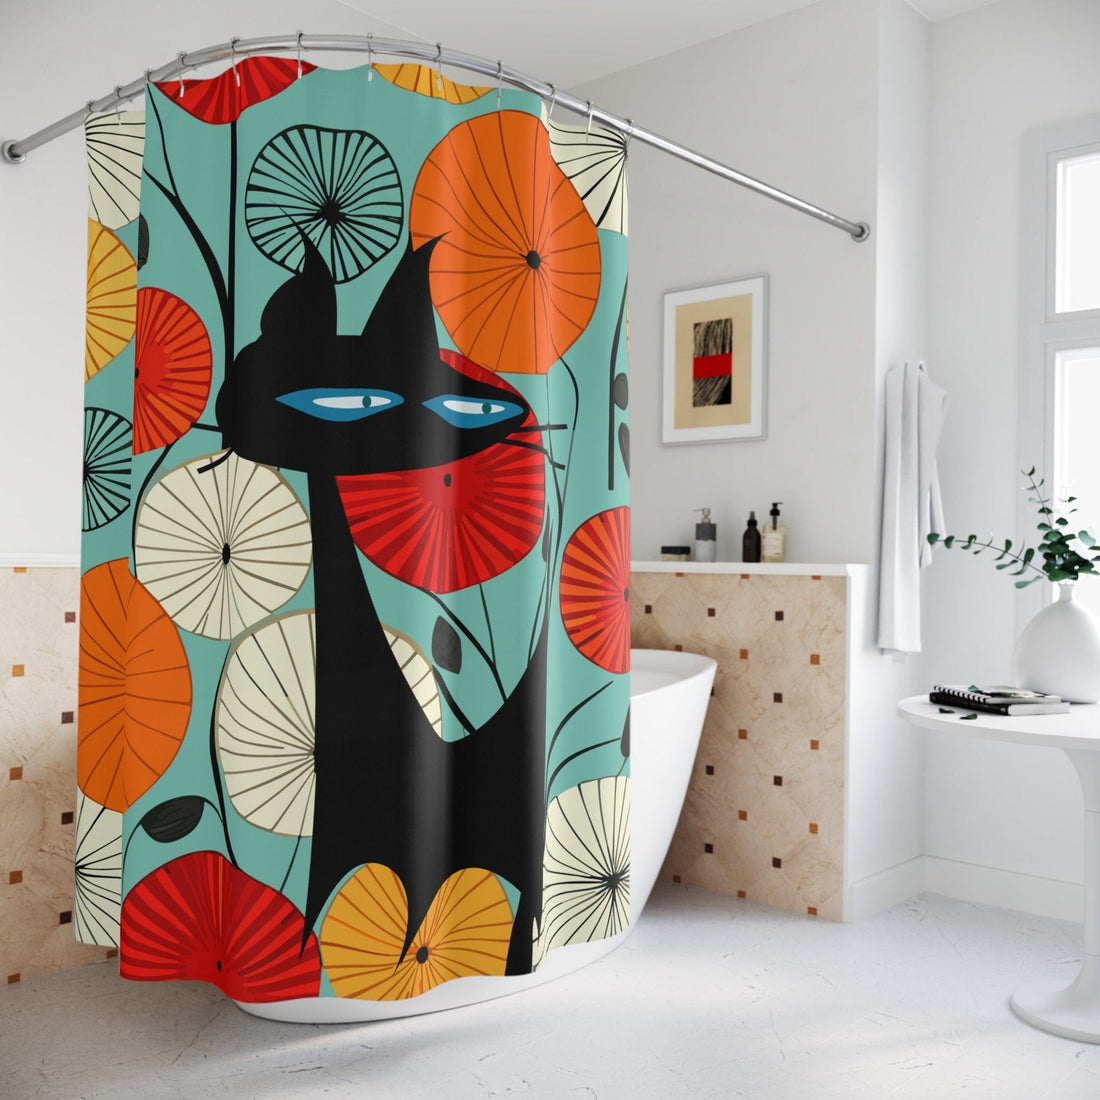 Kate McEnroe New York Atomic Cat 1950s Abstract Lotus Shower Curtain, Vintage Style Mod Geometric Design in Teal, Orange, Red and Yellow - KM13709723Shower CurtainsS40 - ATO - LOT - 7X7